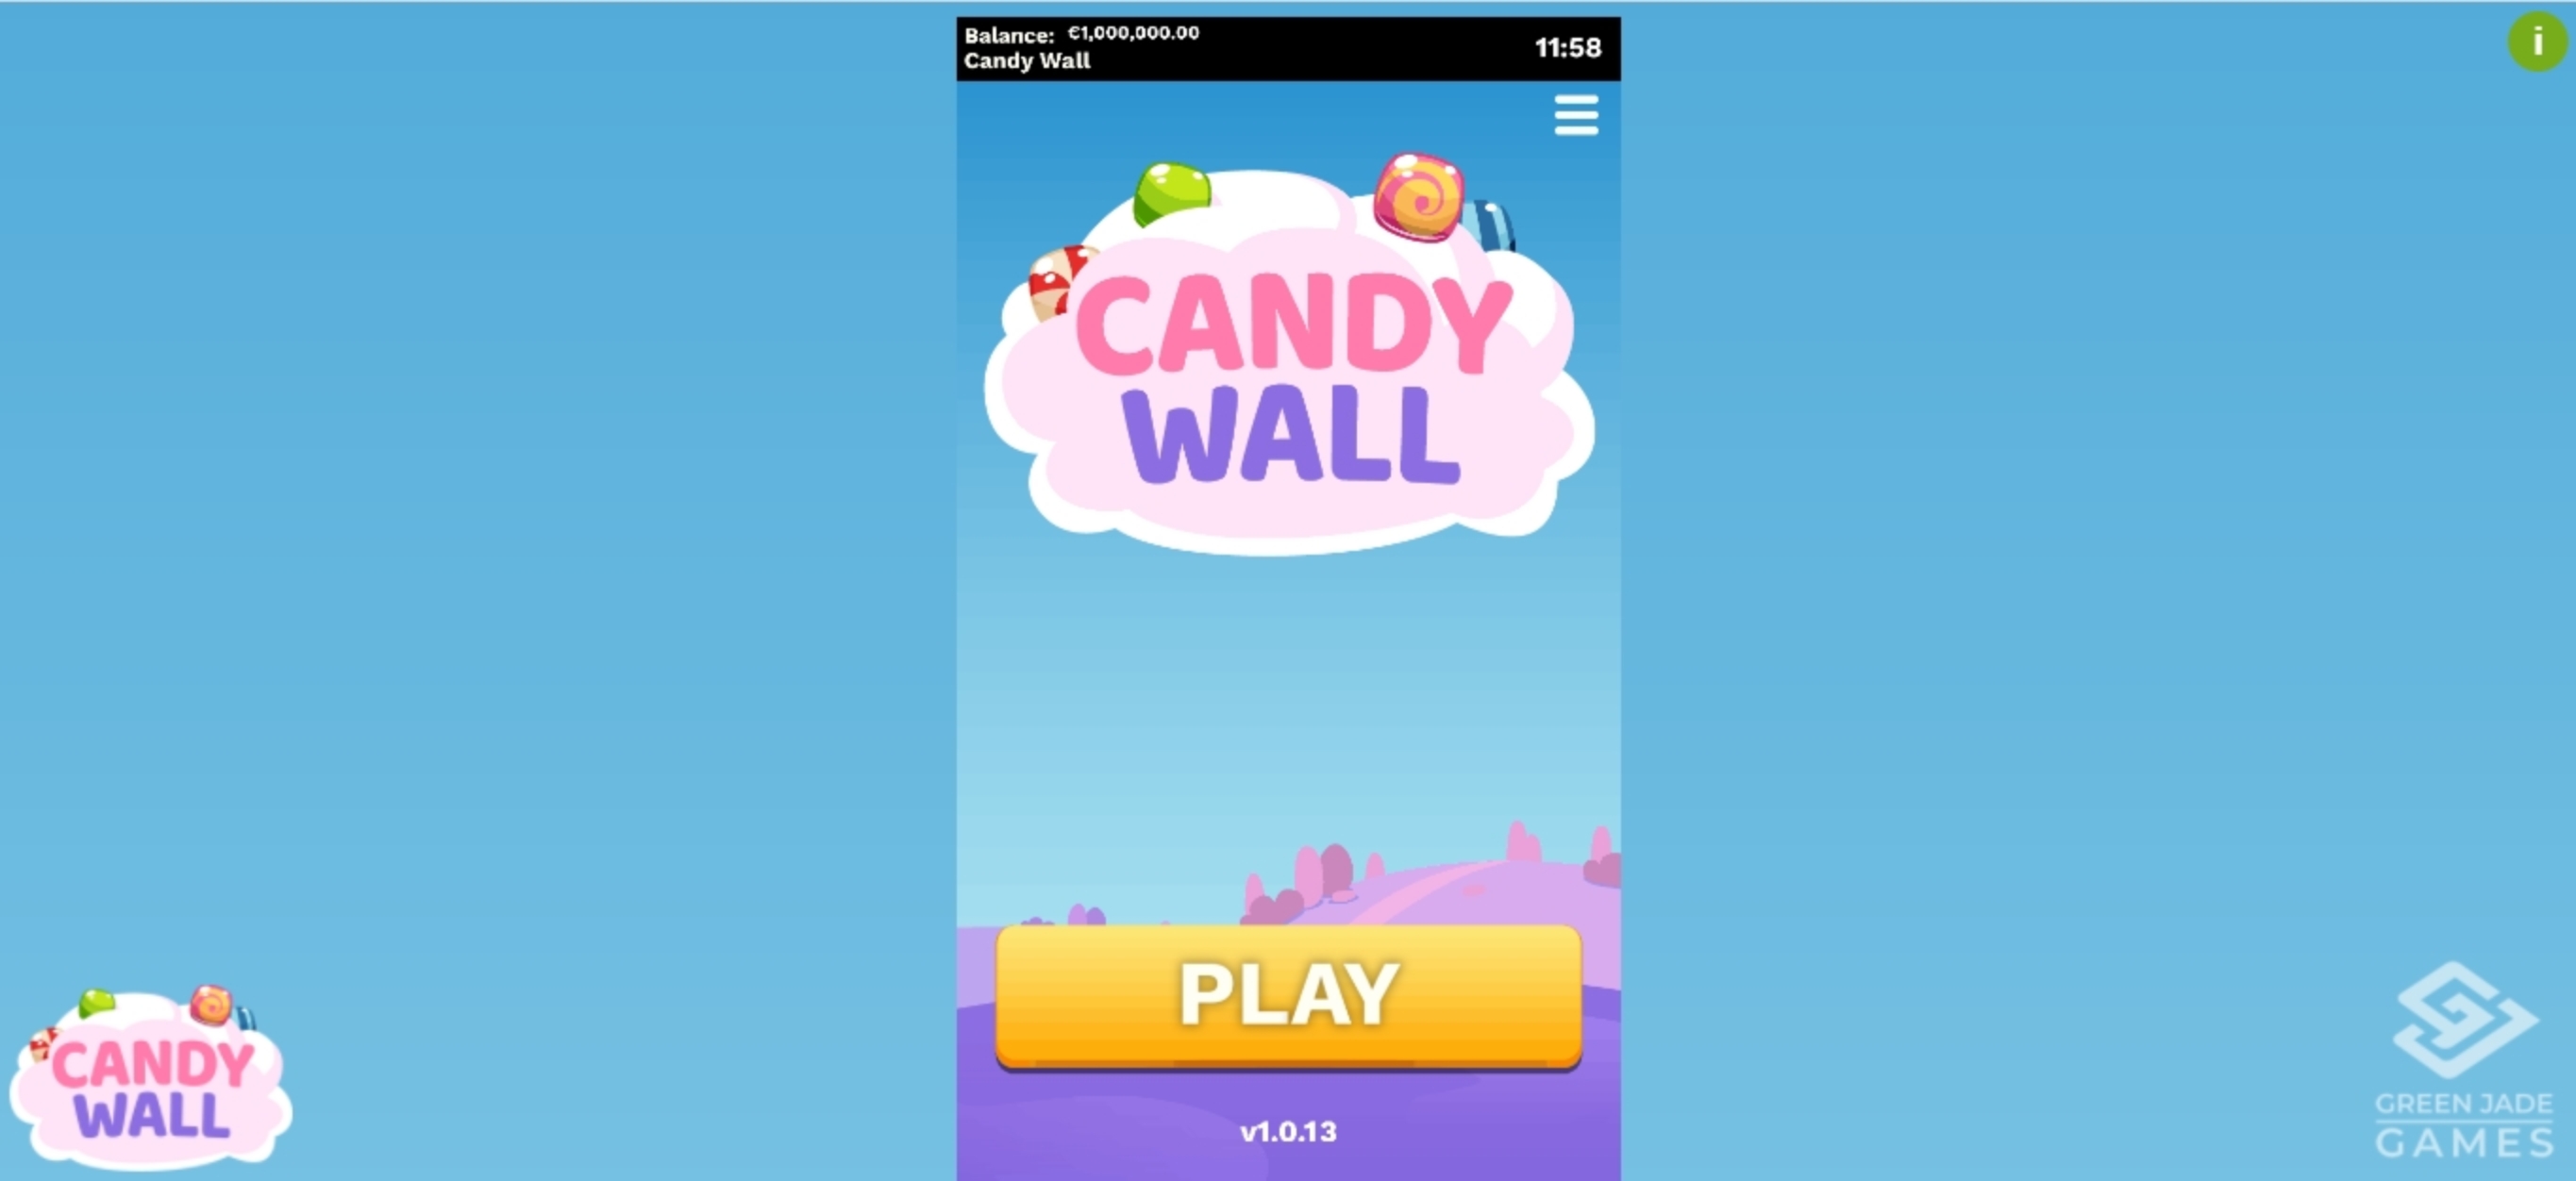 Play Candy Wall Free Casino Slot Game by Green Jade Games